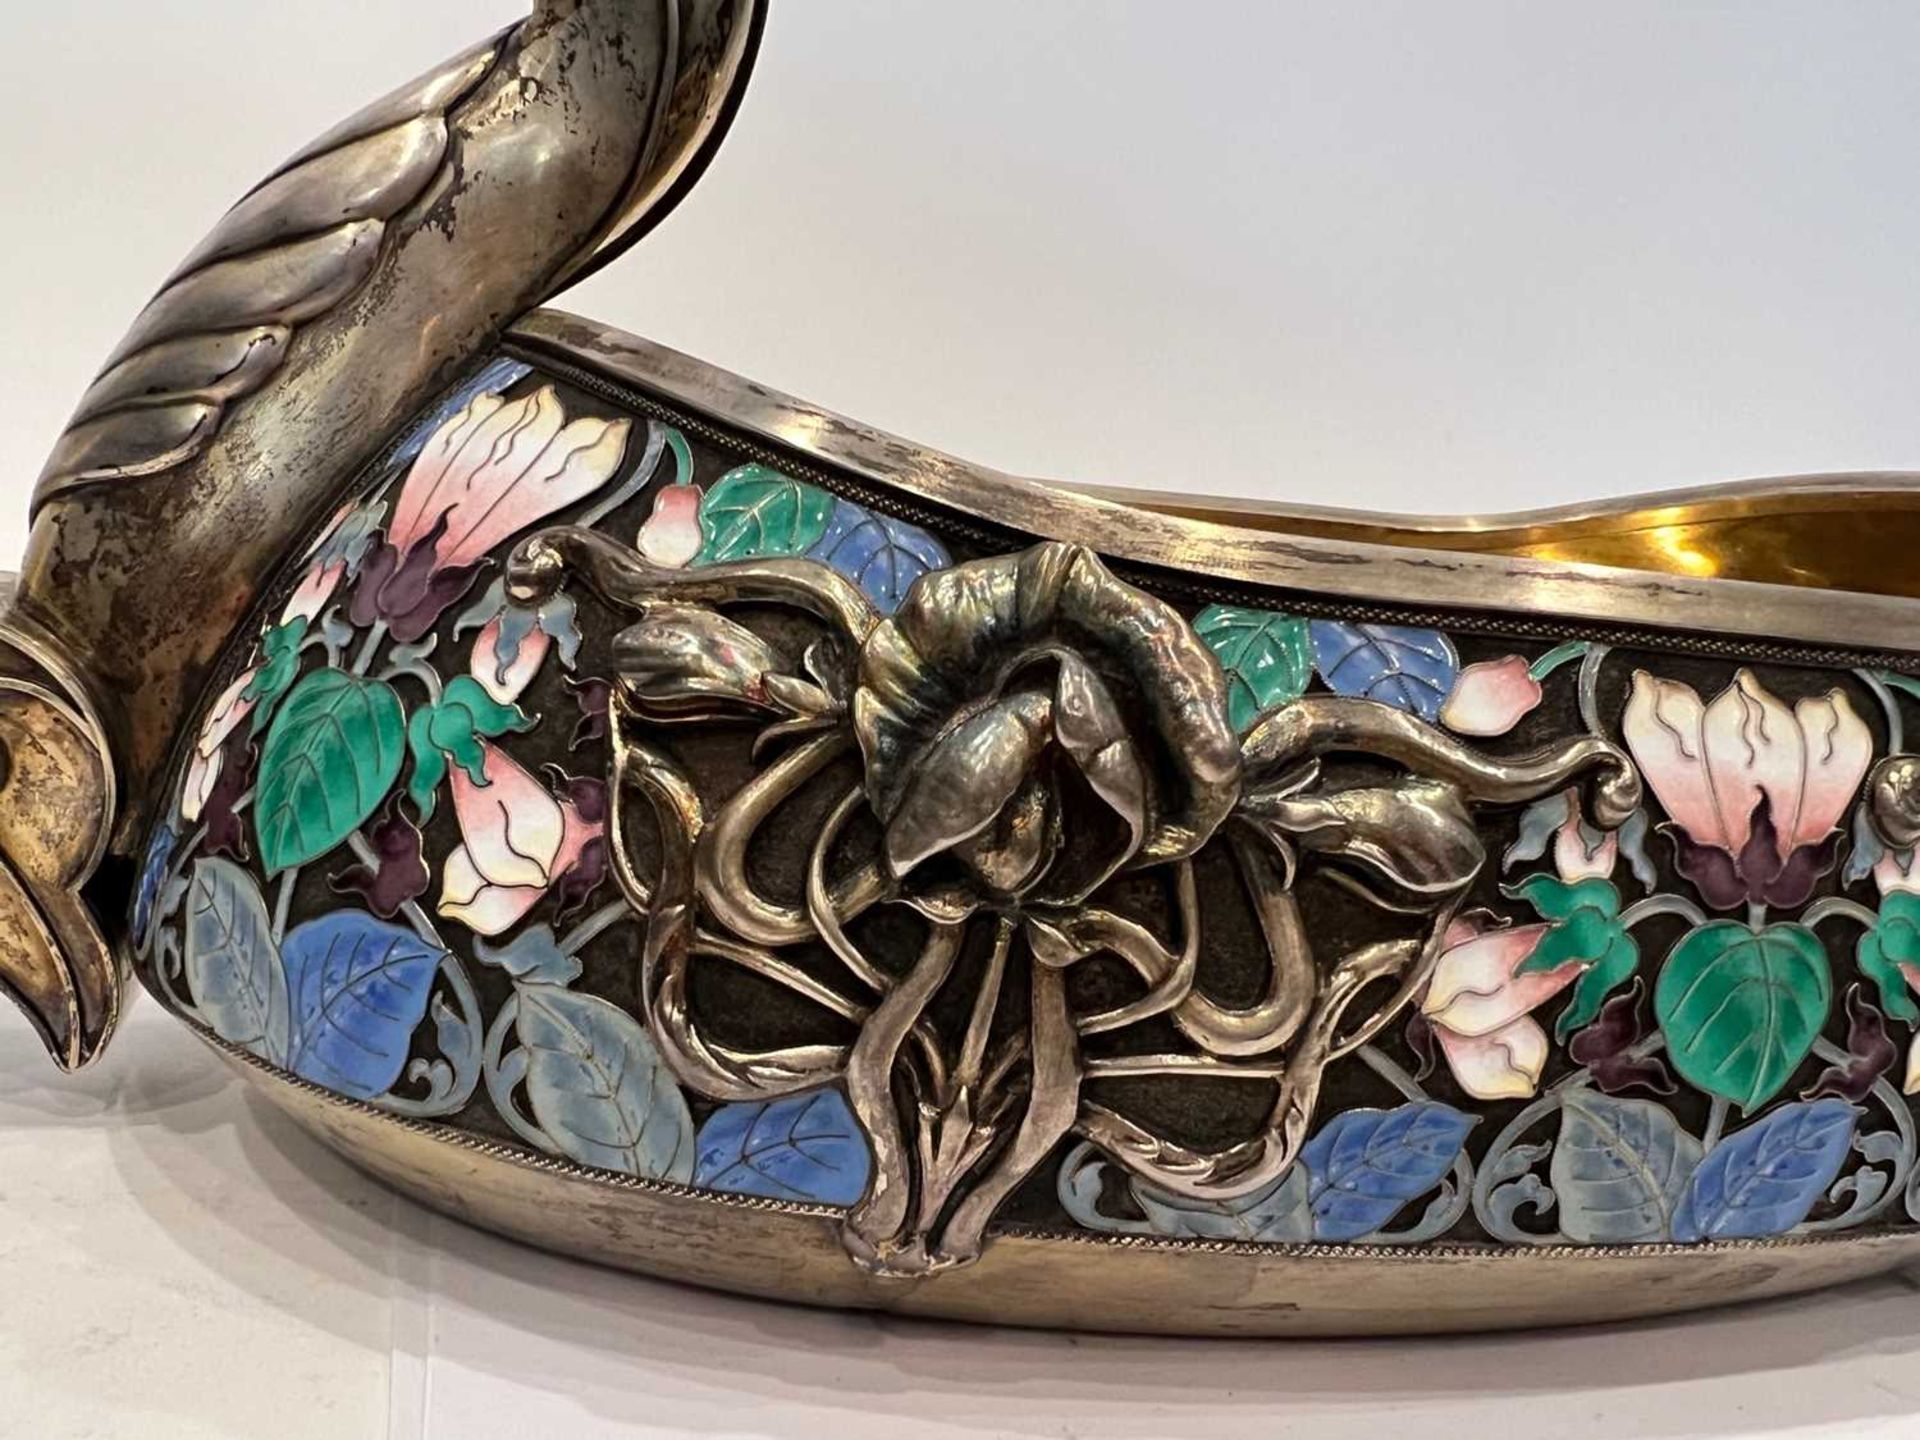 A MASSIVE EARLY 20TH CENTURY RUSSIAN SILVER AND ENAMEL KOVSH IN THE FORM OF A SWAN - Image 13 of 28